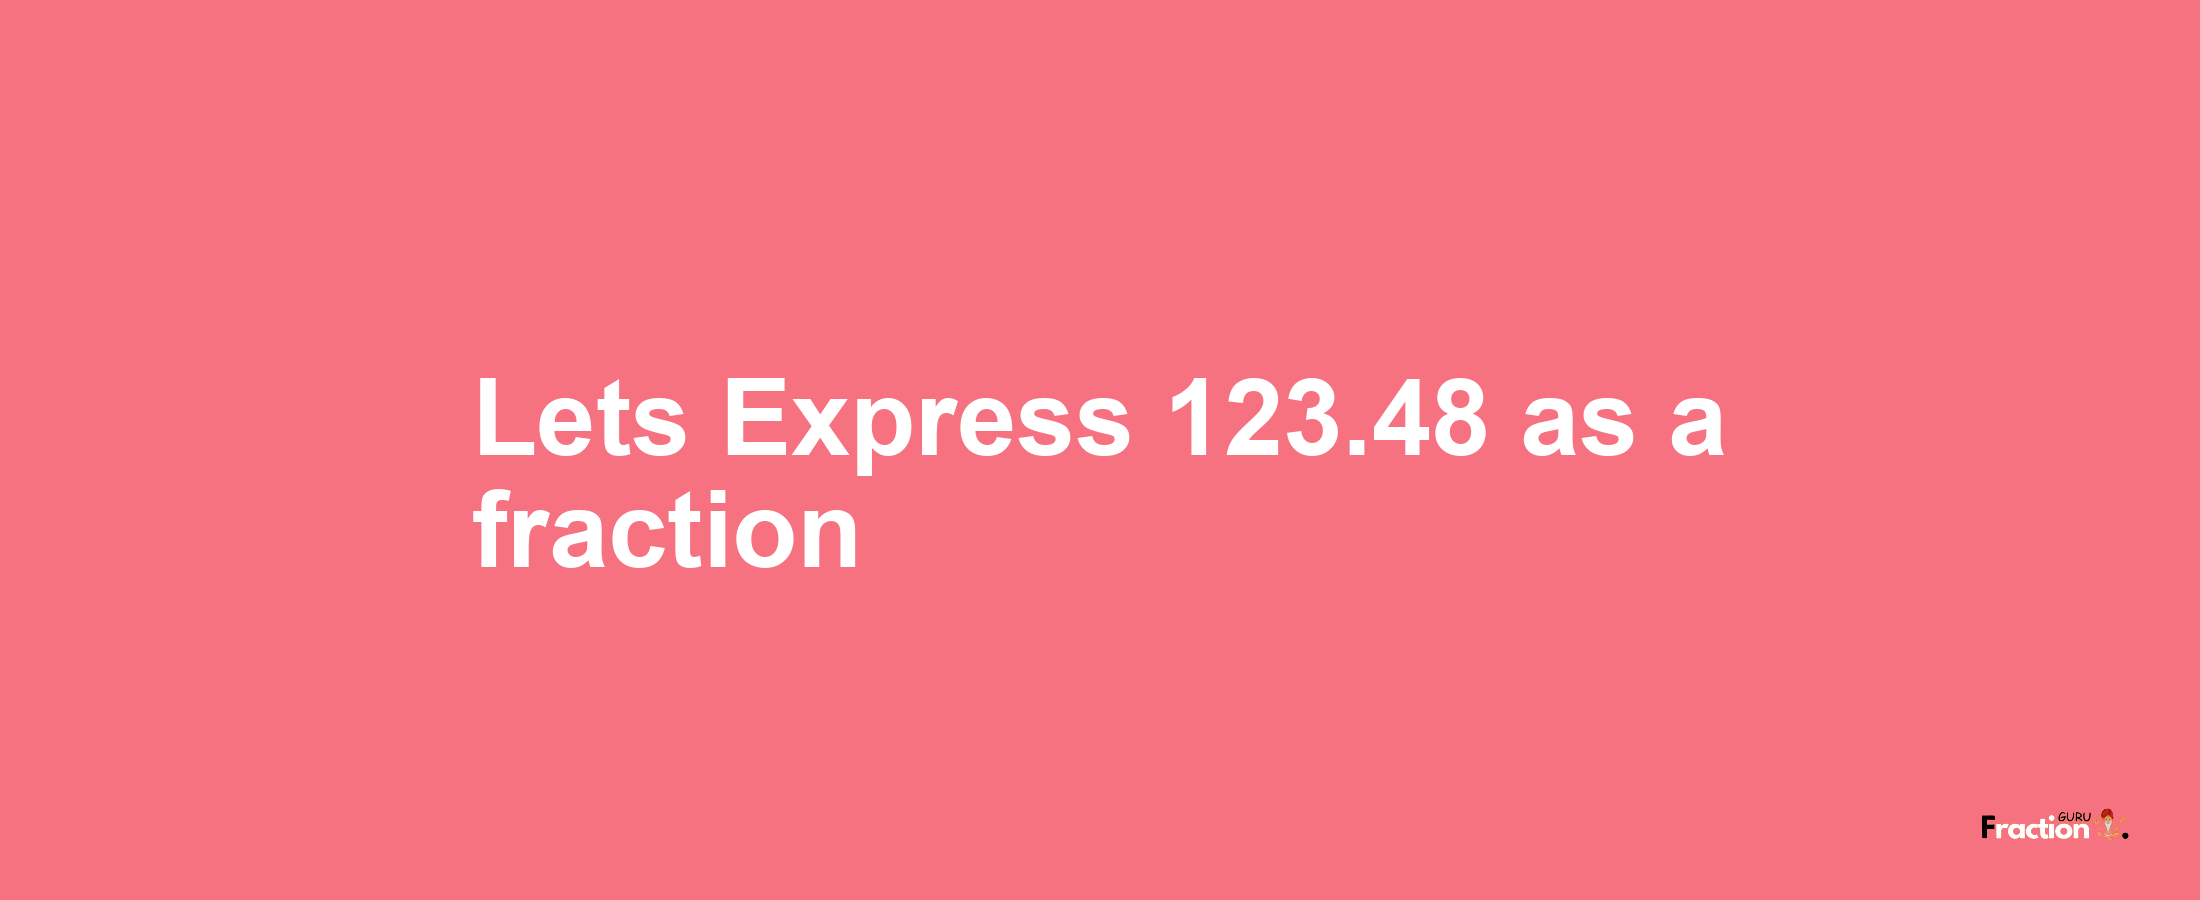 Lets Express 123.48 as afraction